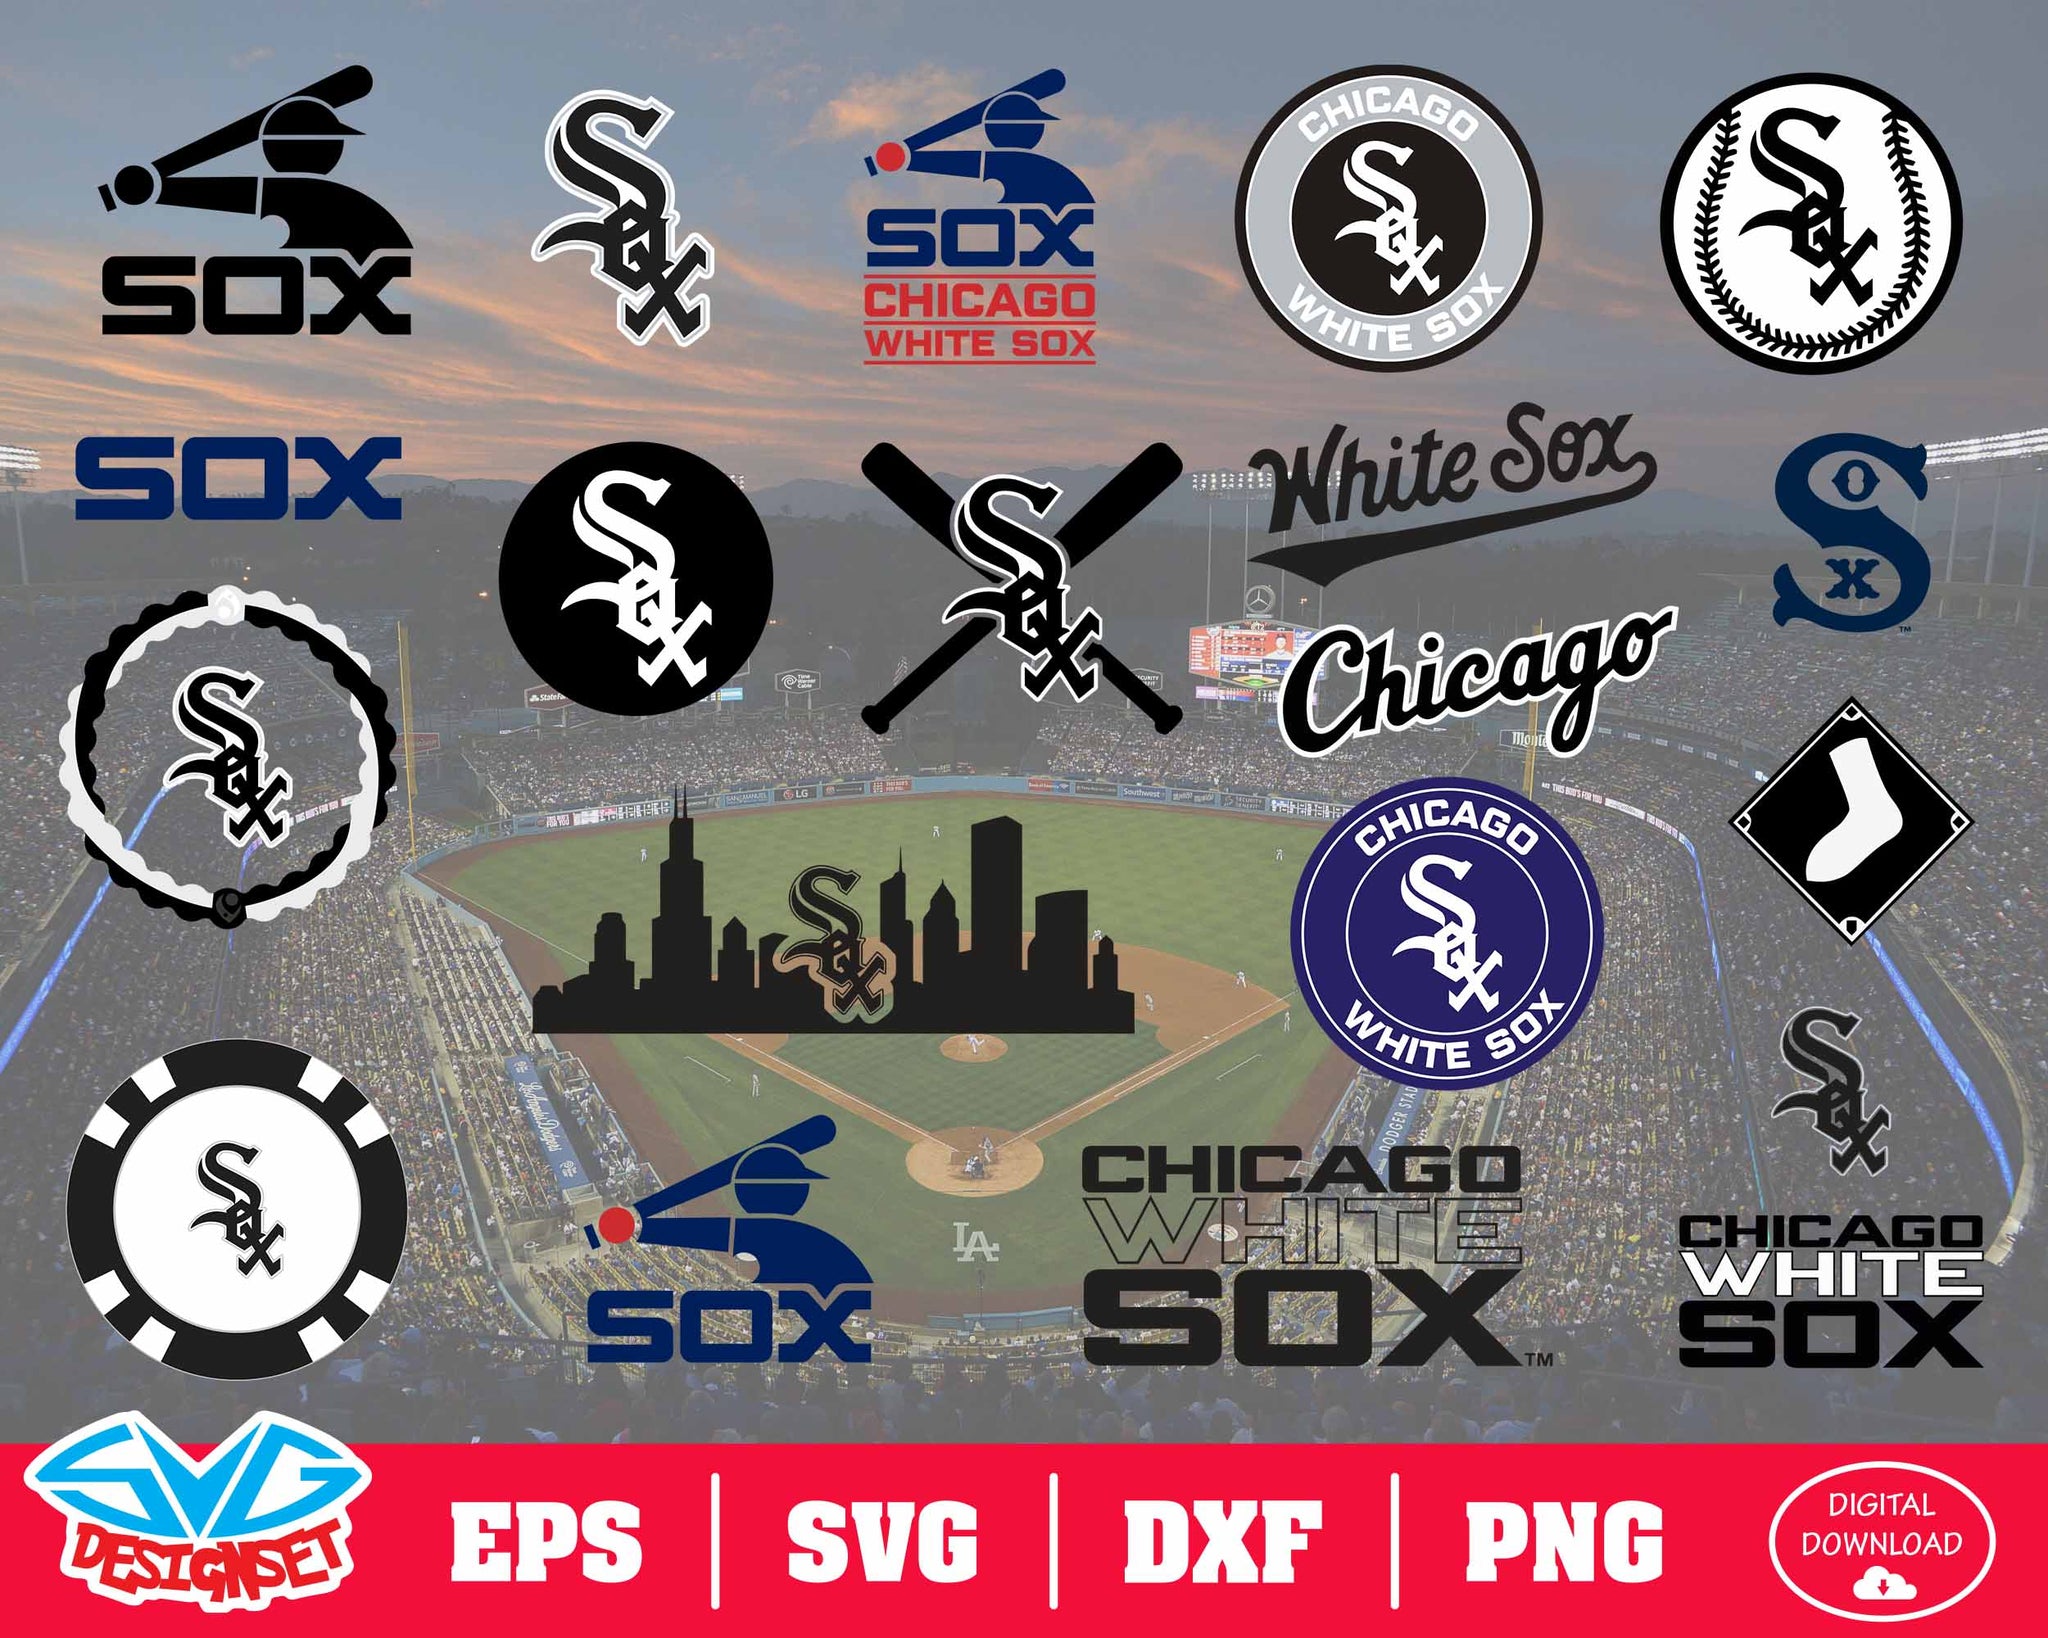 Chicago White Sox Team Svg, Dxf, Eps, Png, Clipart, Silhouette and Cutfiles - SVGDesignSets